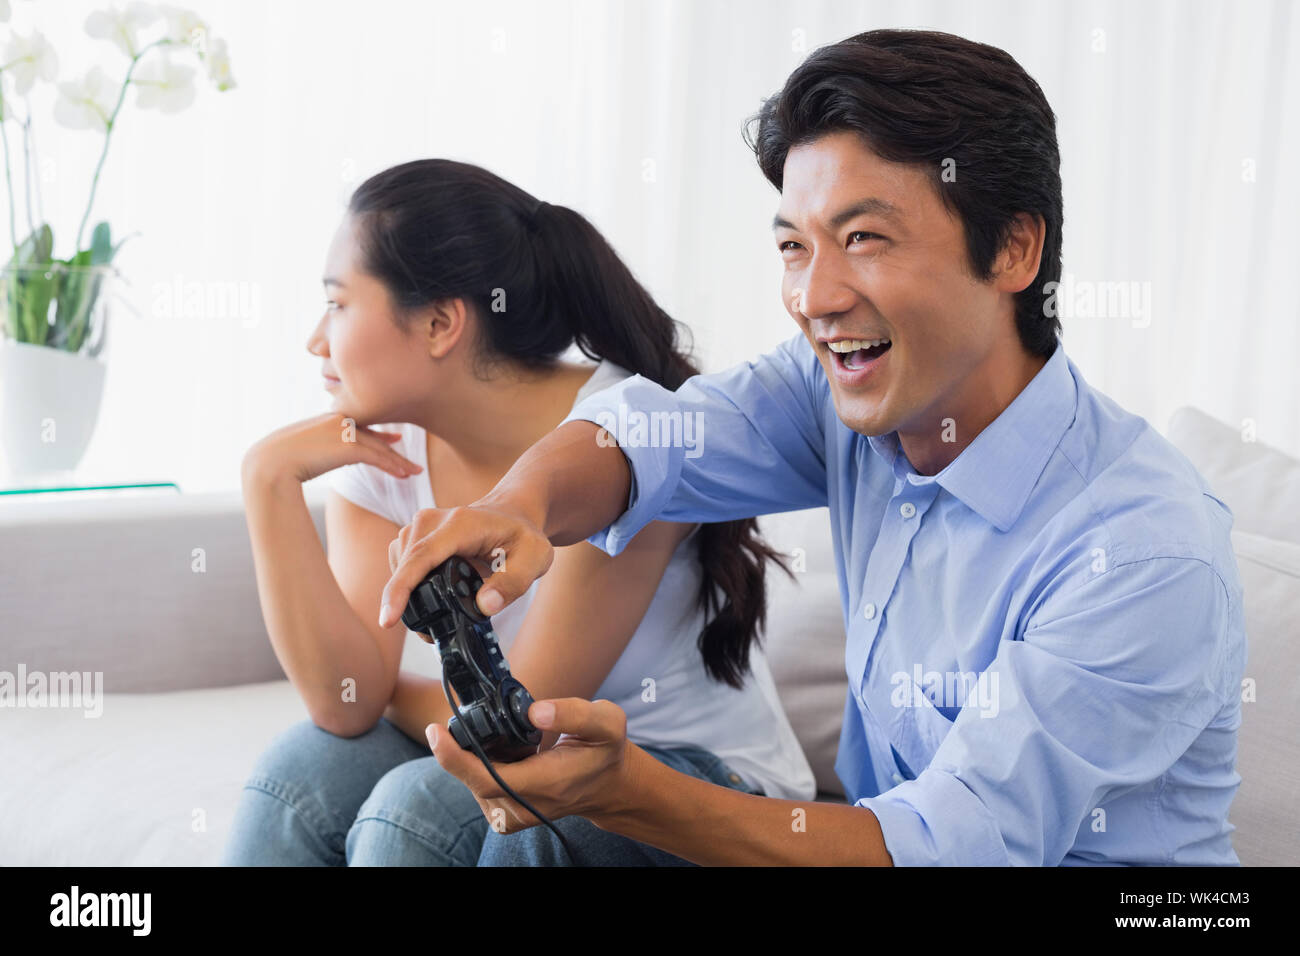 Boring Date. Excited Black Guy Playing Video Games and Ignoring Girlfriend  Next To Him Stock Image - Image of enjoy, conflict: 188745699